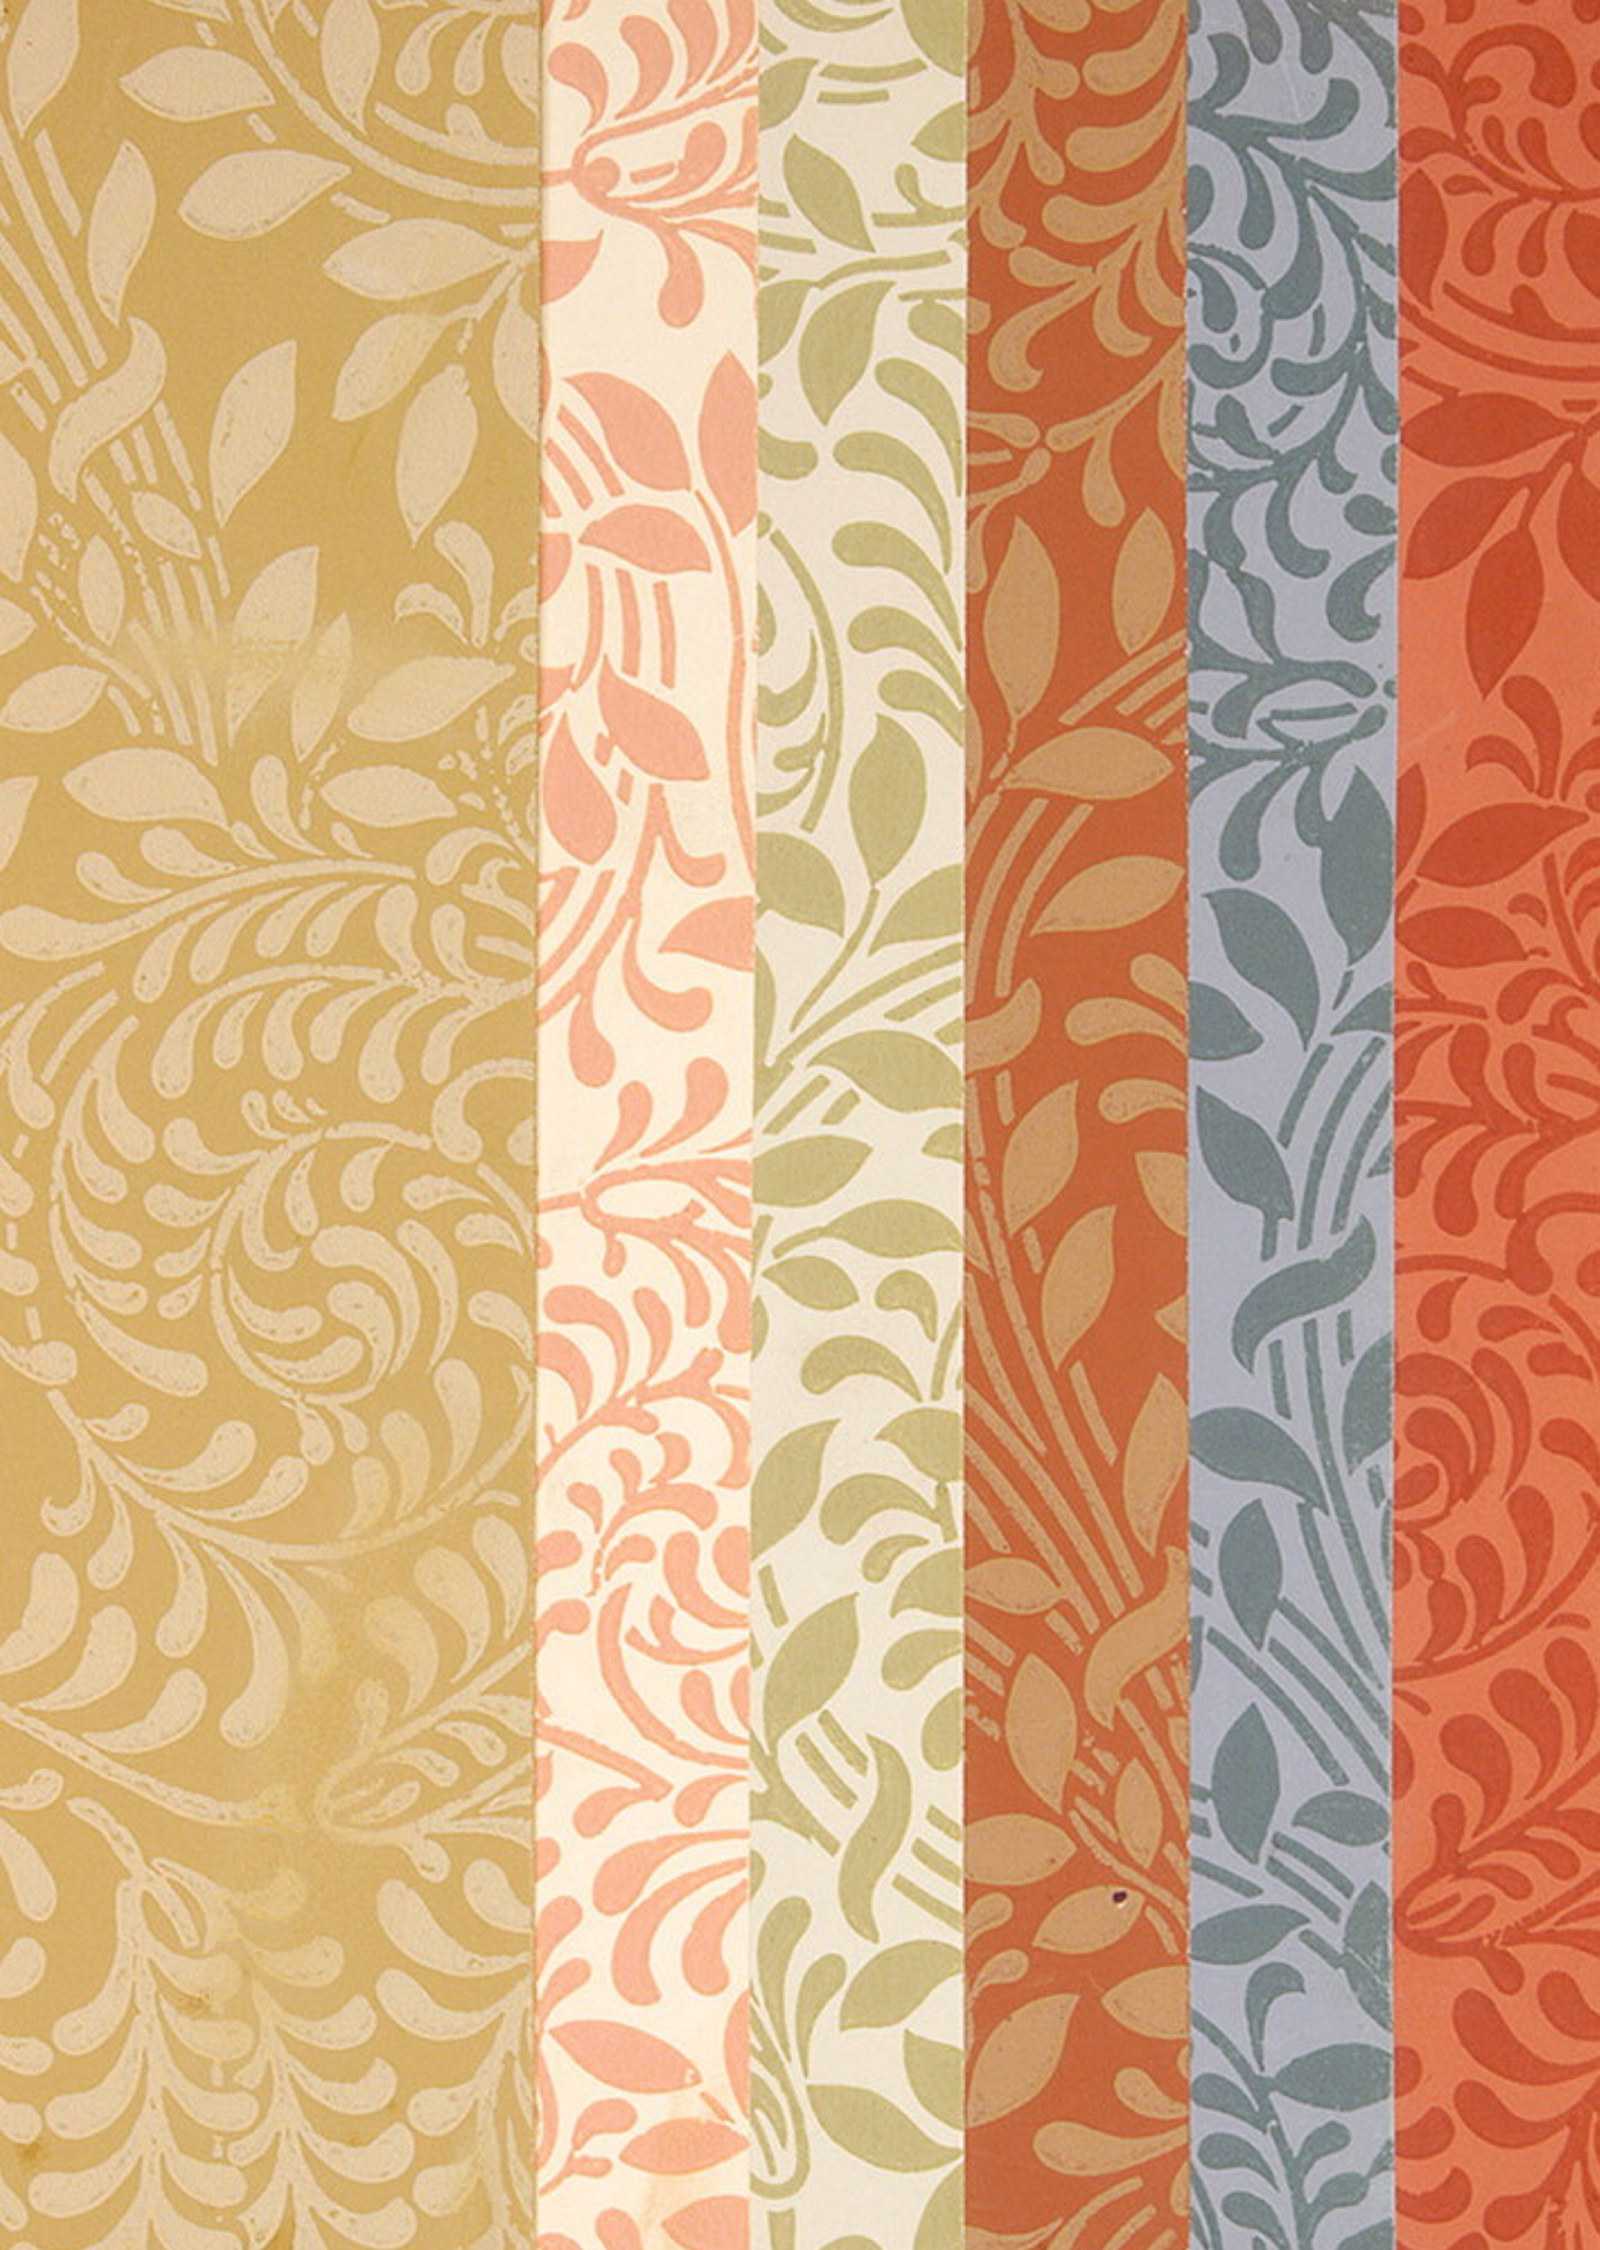 Leaf pattern samples from a sample book of wallpapers, Essex & Co., 1893